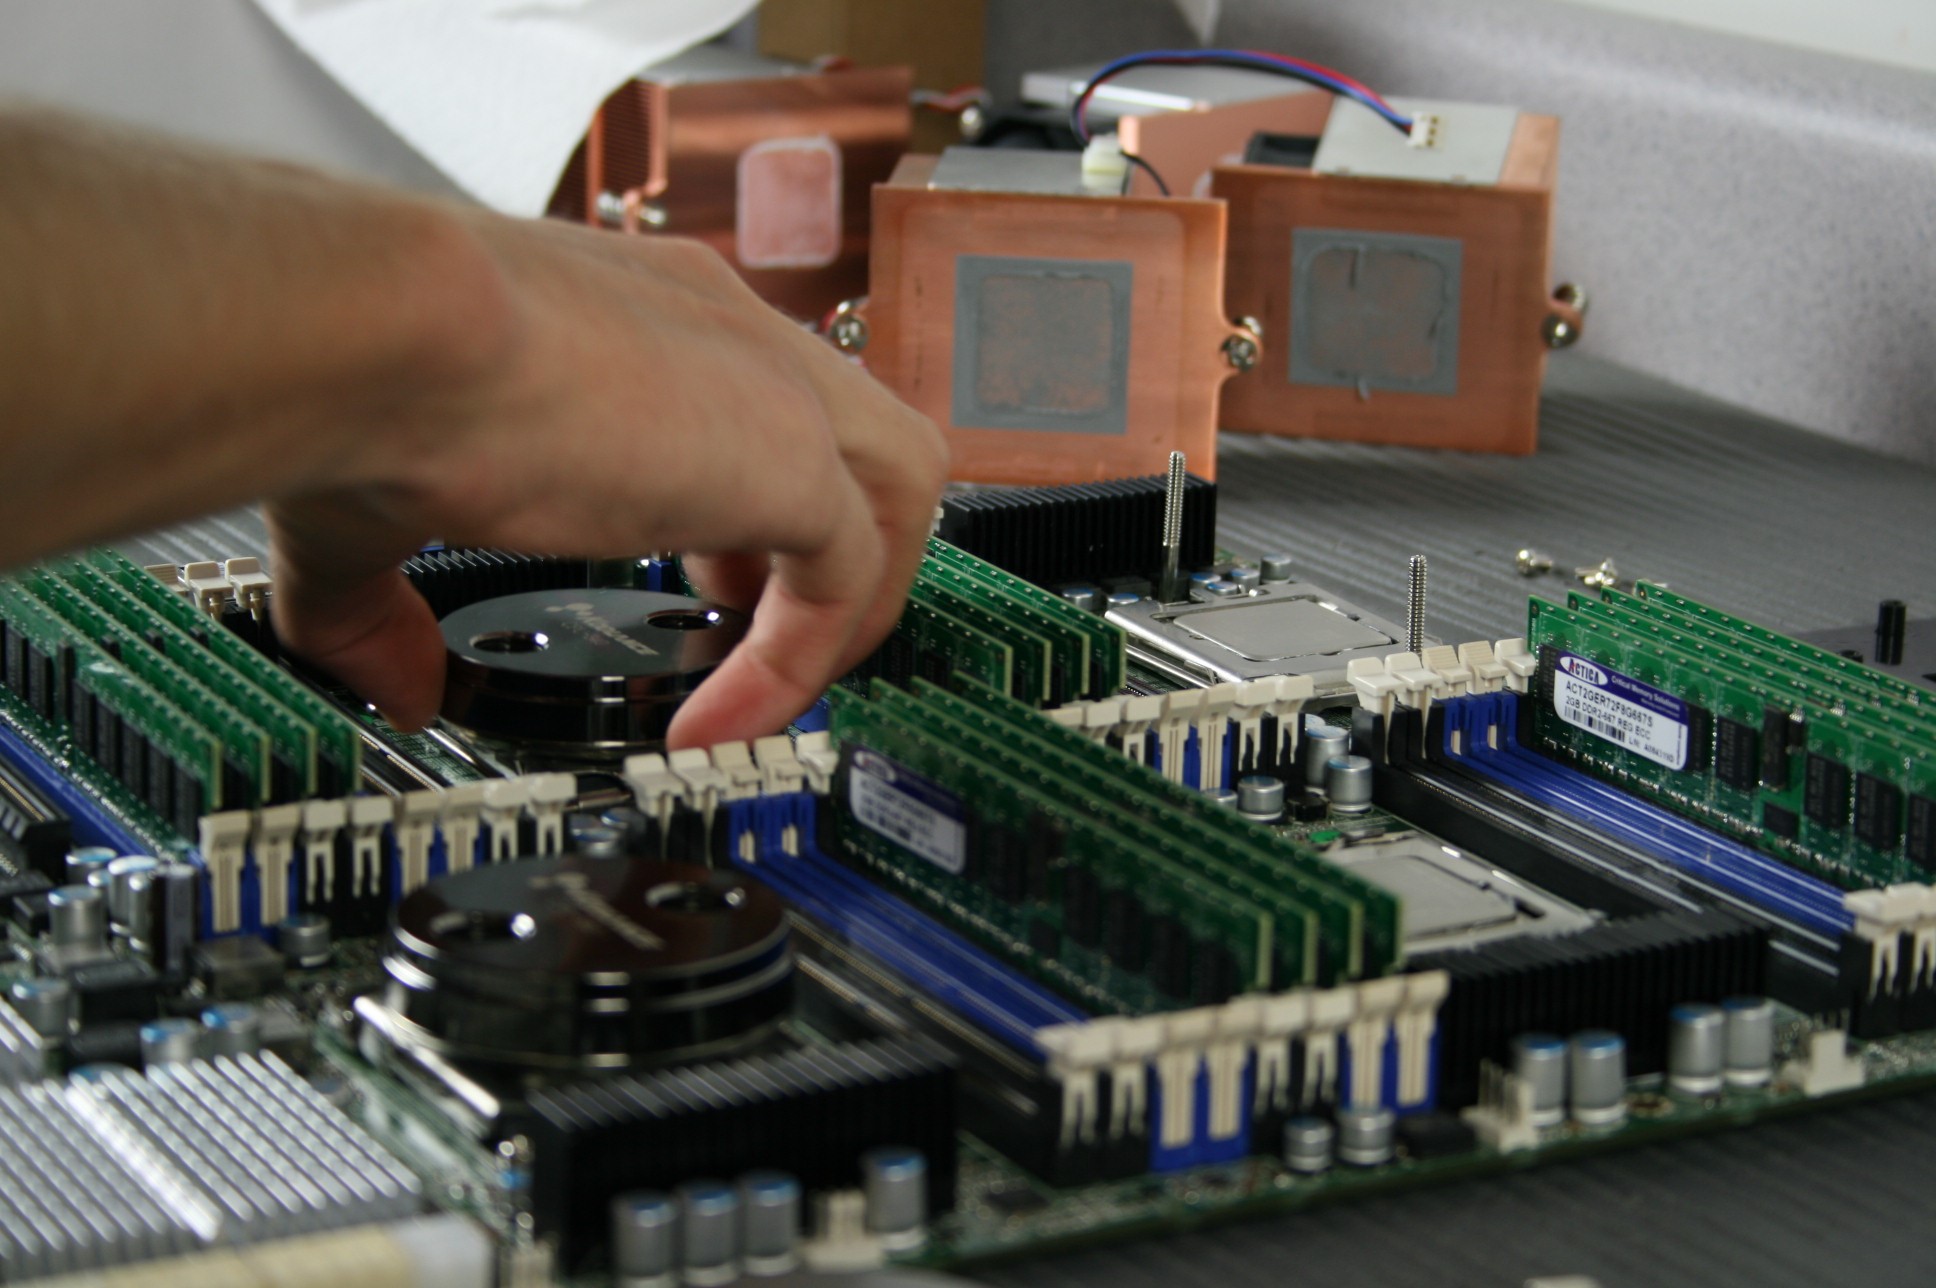 Sustained growth in the information technology (IT) industry and increasing demand for advanced technologies are the key drivers propelling the server PCB market